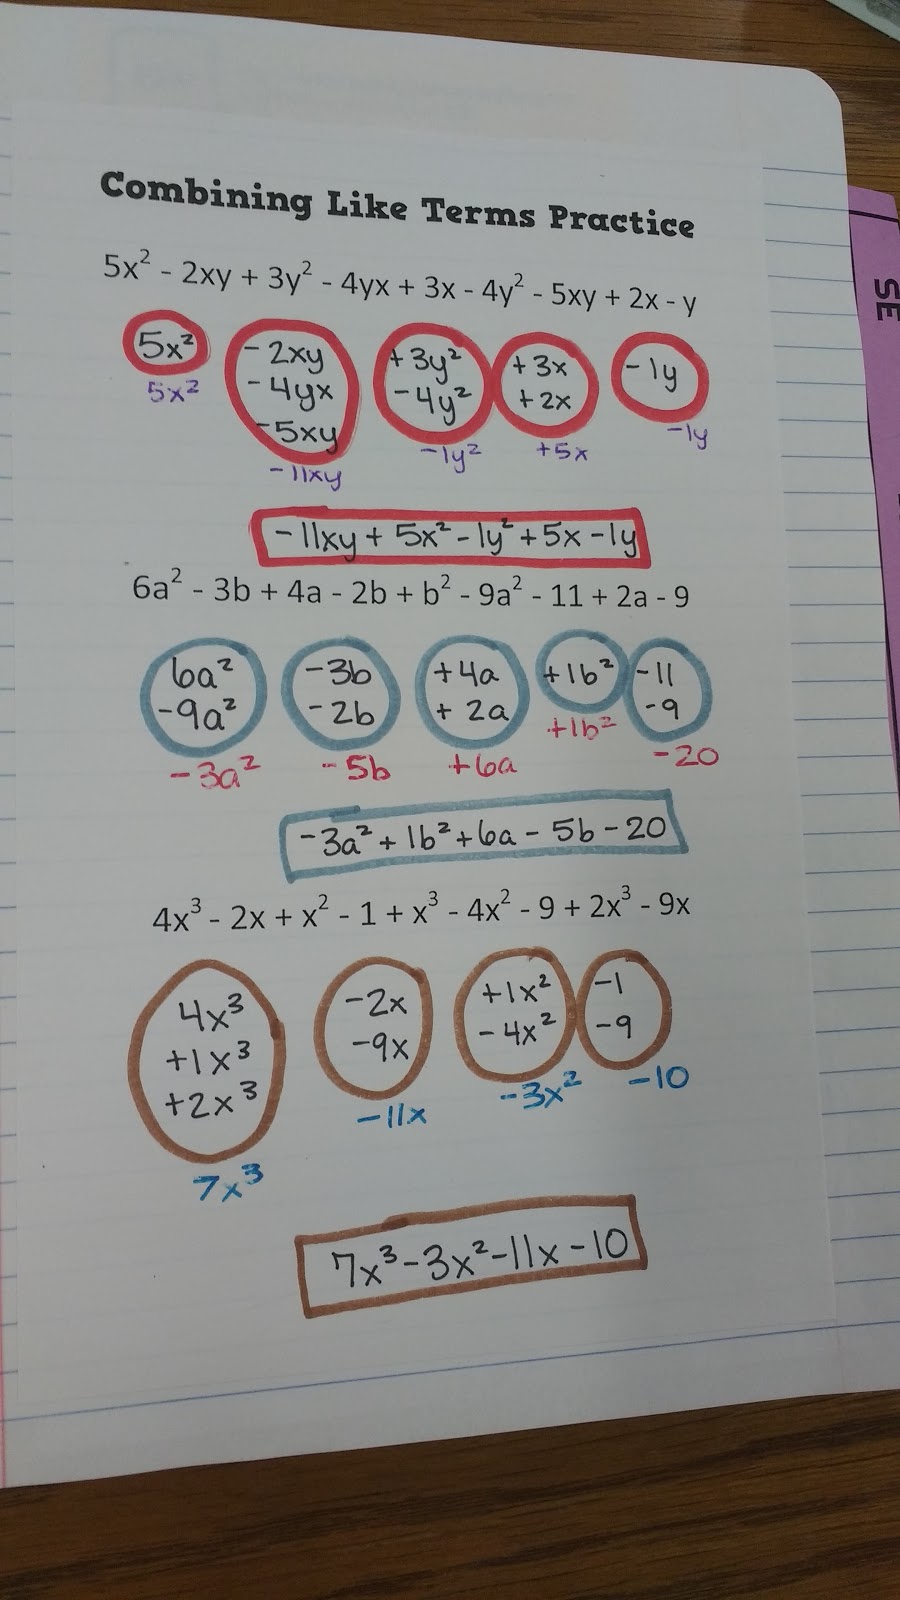 combining like terms practice problems